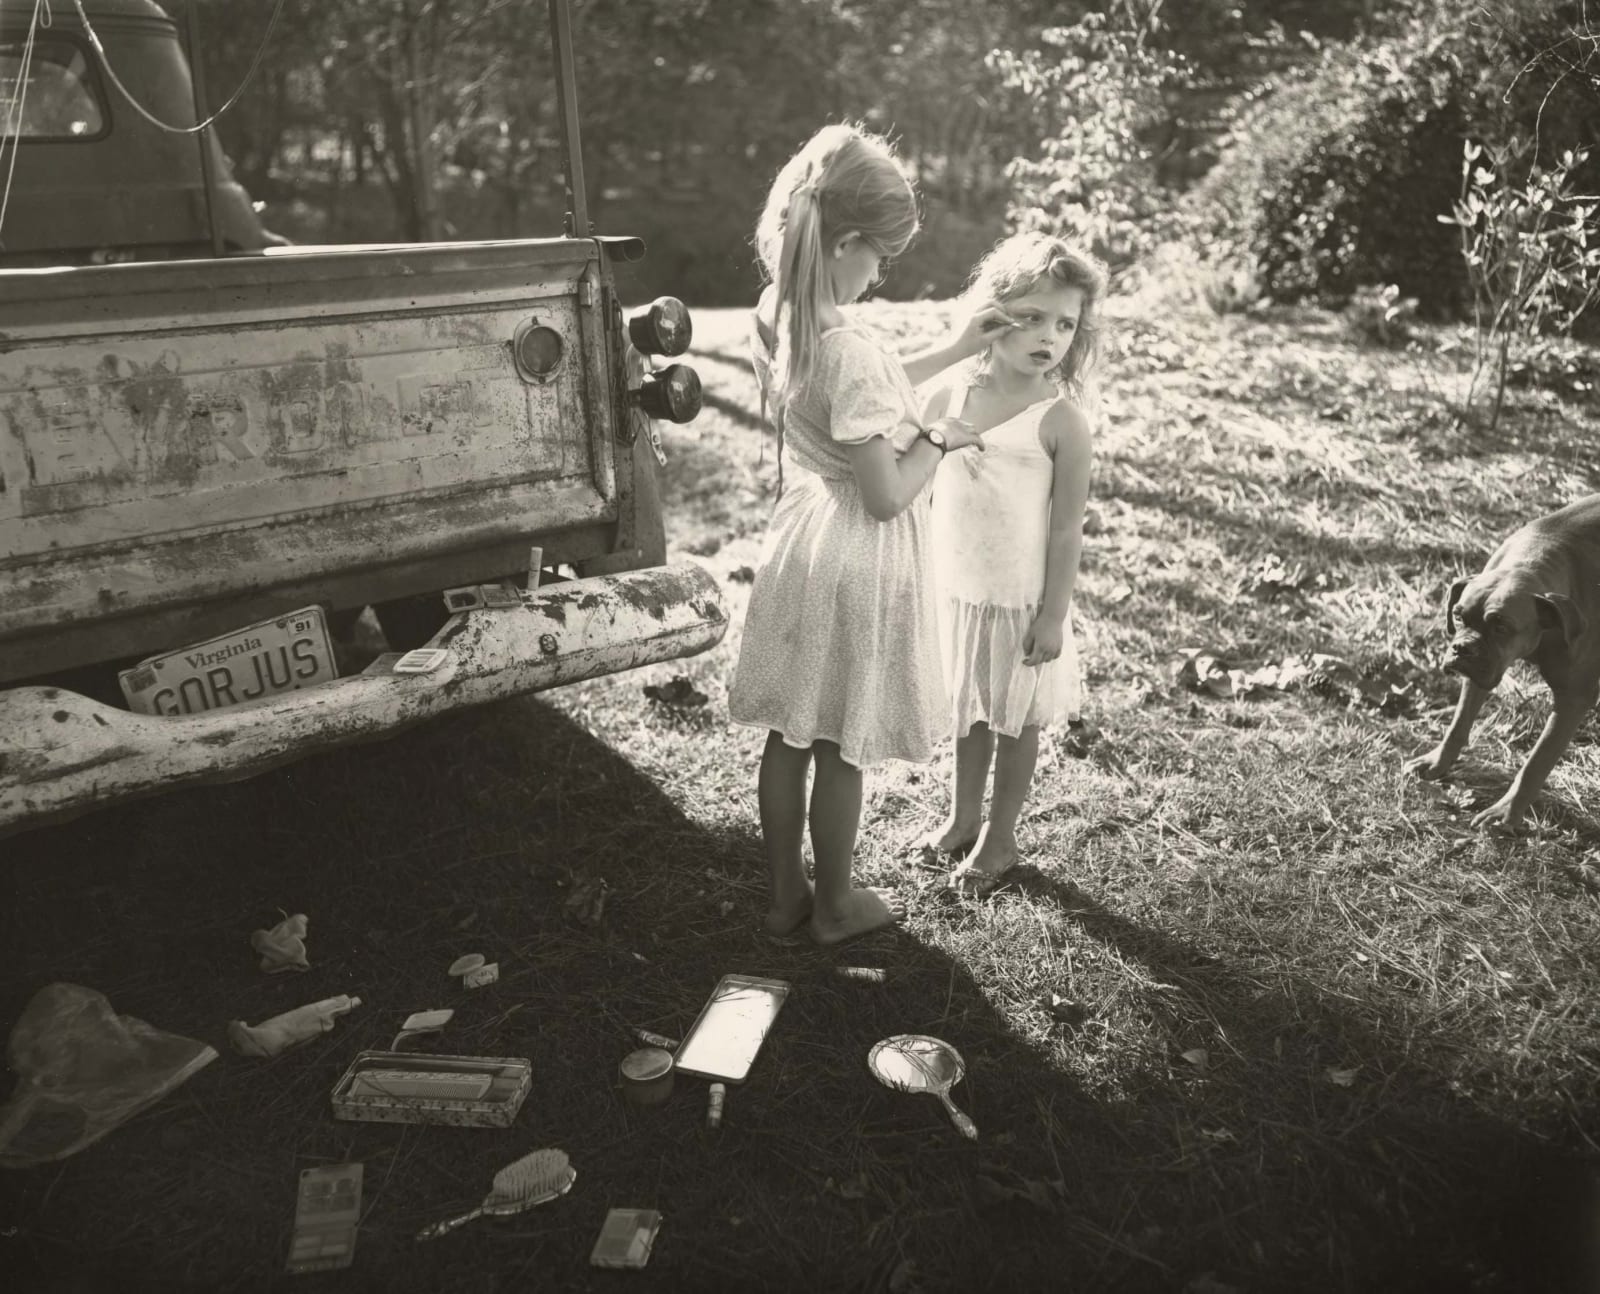 Jessie Mann helping Virginia Mann with her make-up as young girls, mirrors on the ground and truck with Gorjus license plate next to the two girls, by Sally Mann